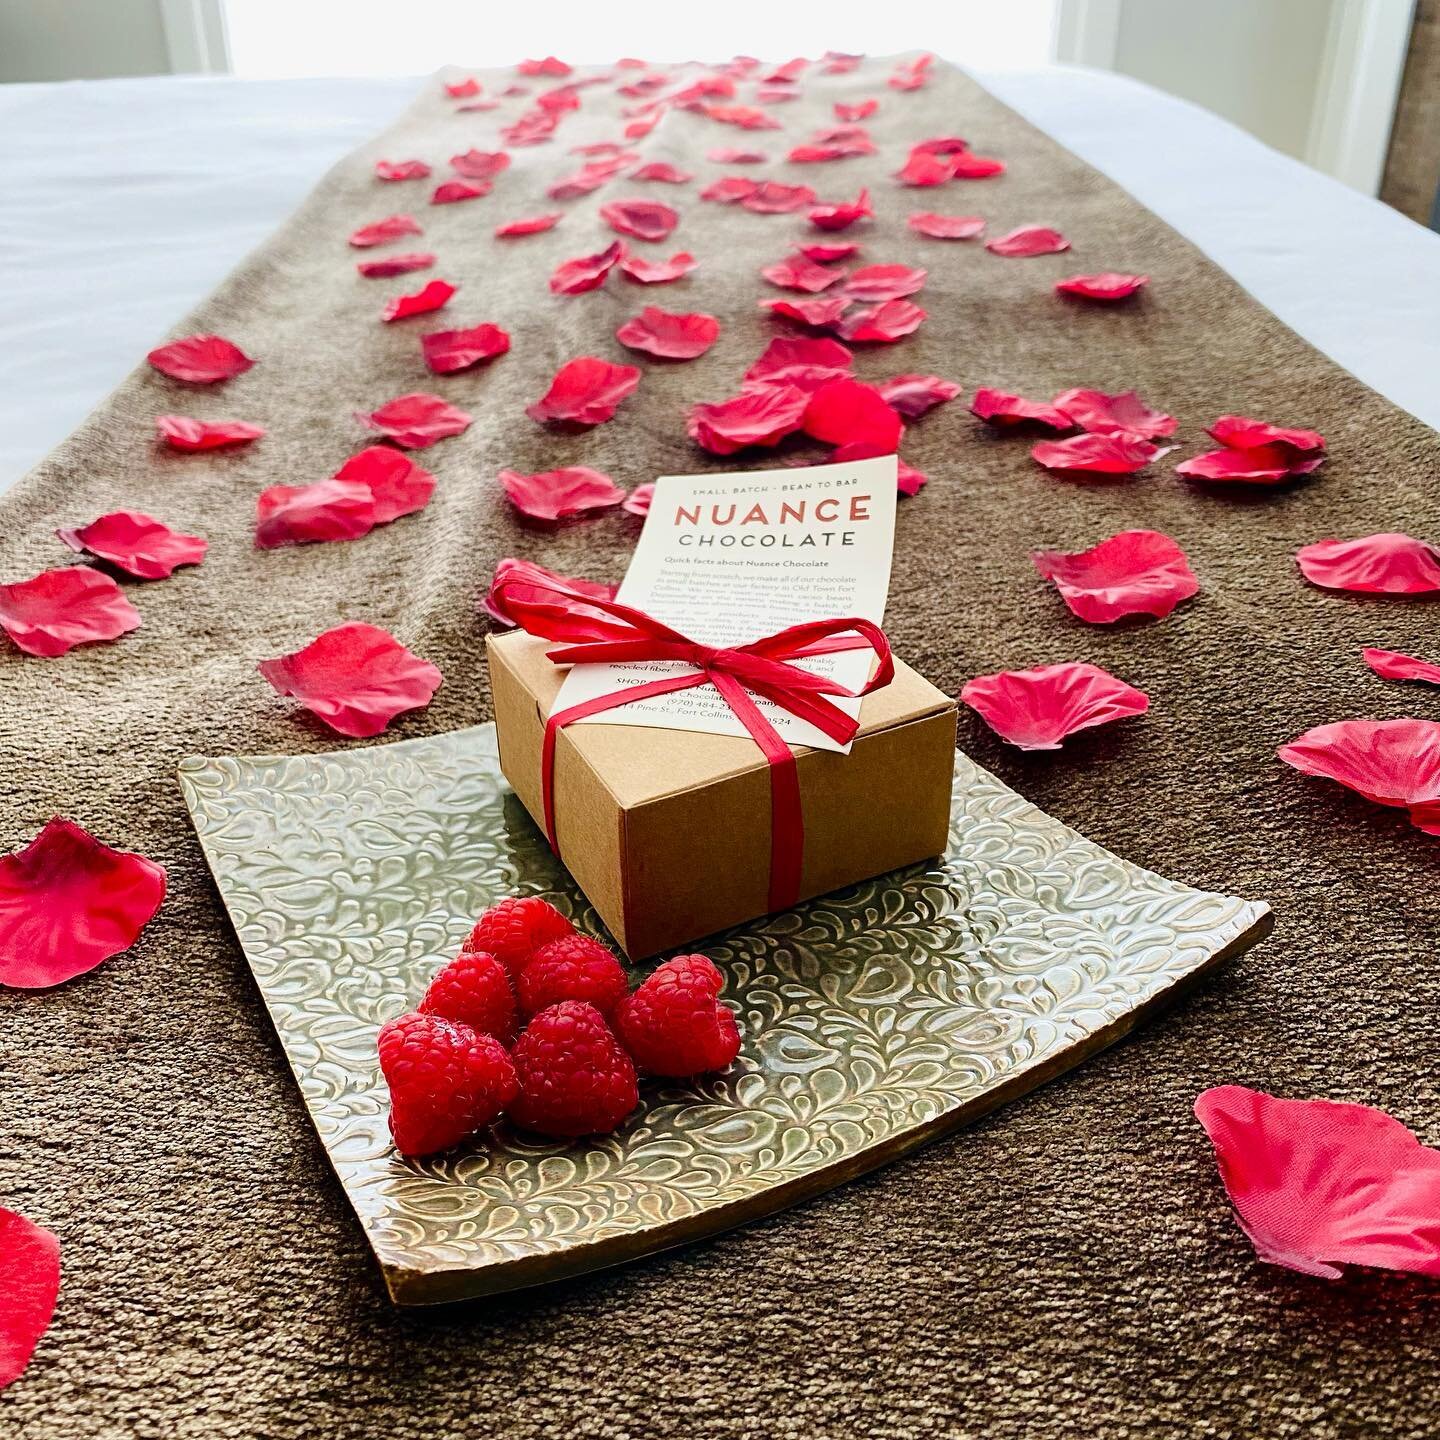 Valentine's Day is around the corner...

Treat your loved one to one of our packages! Our Romance Package is a great way to add a special touch to a night's stay. See available packages after selecting a room on our booking page. 

Book for a stay be